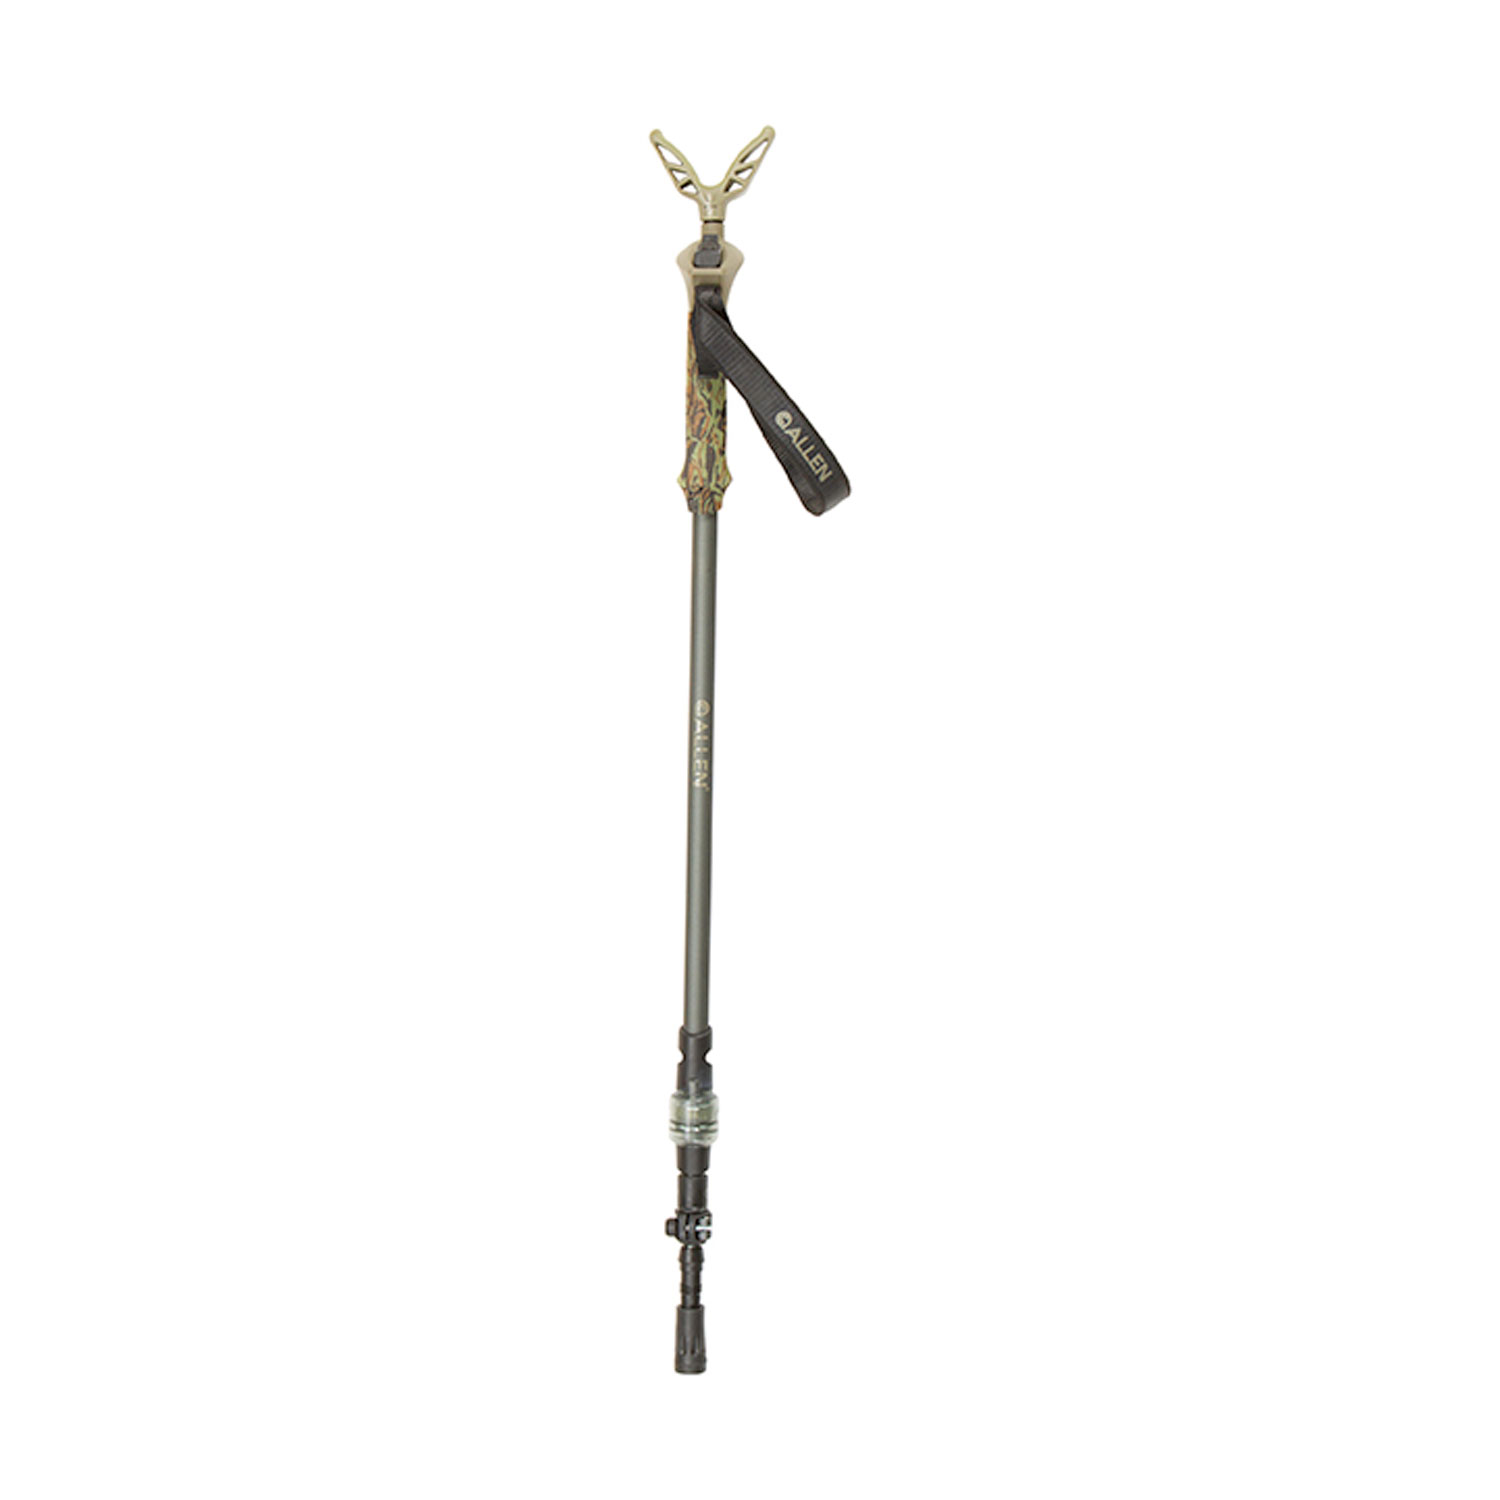 Allen 21447 Axial EZ-Stik Shooting Stick Monopod made of Matte Beetle Green Aluminum with Rubber Foot, Push Button Auto Slide Action, Post Attachment System & 29-61